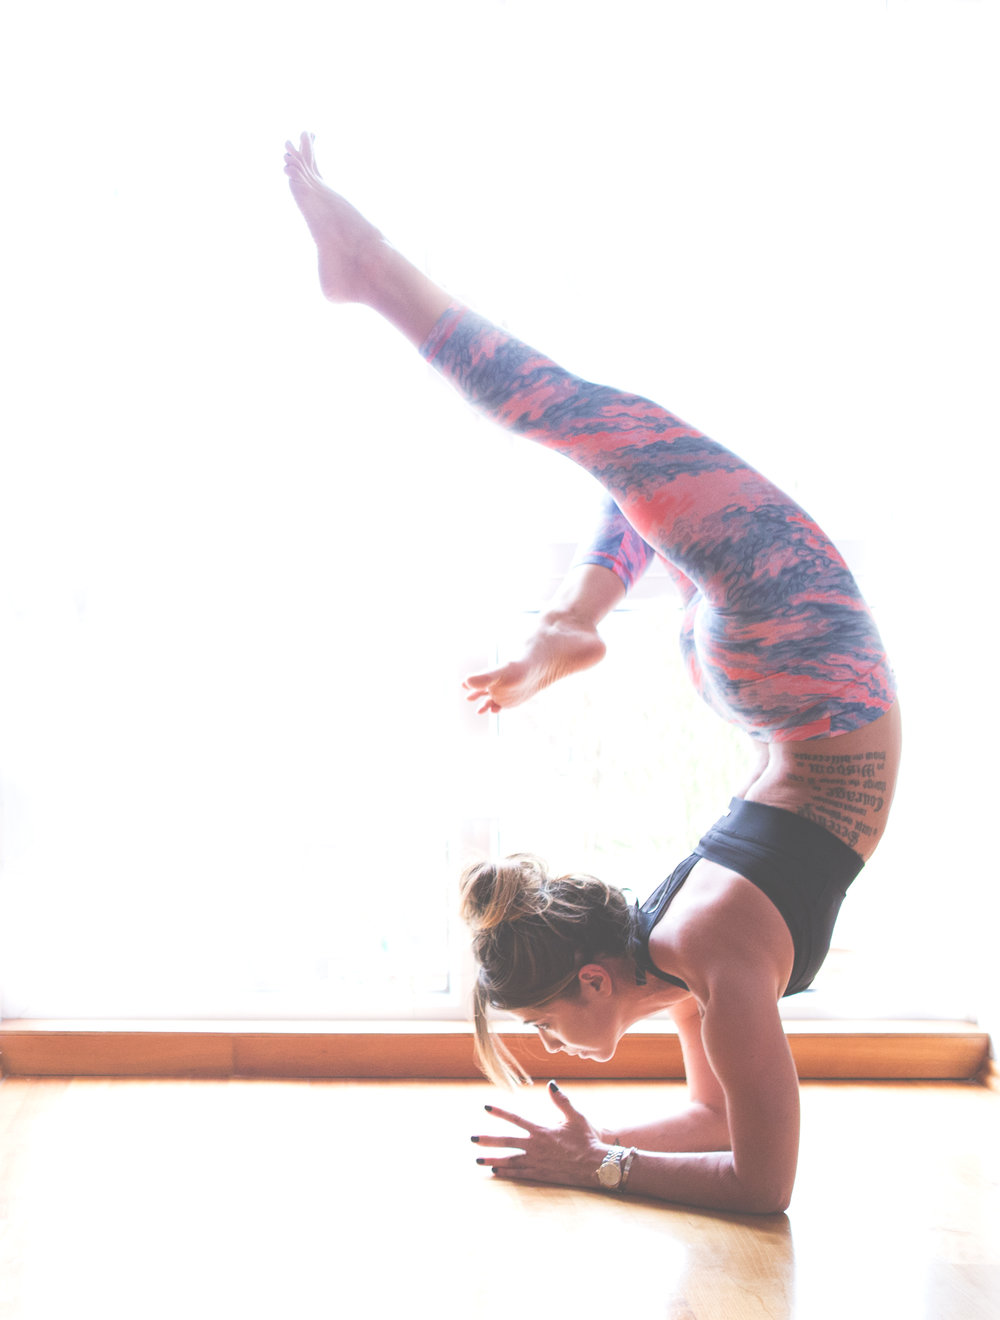 Confessions of a Yoga Teacher: The one pose I was terrified of